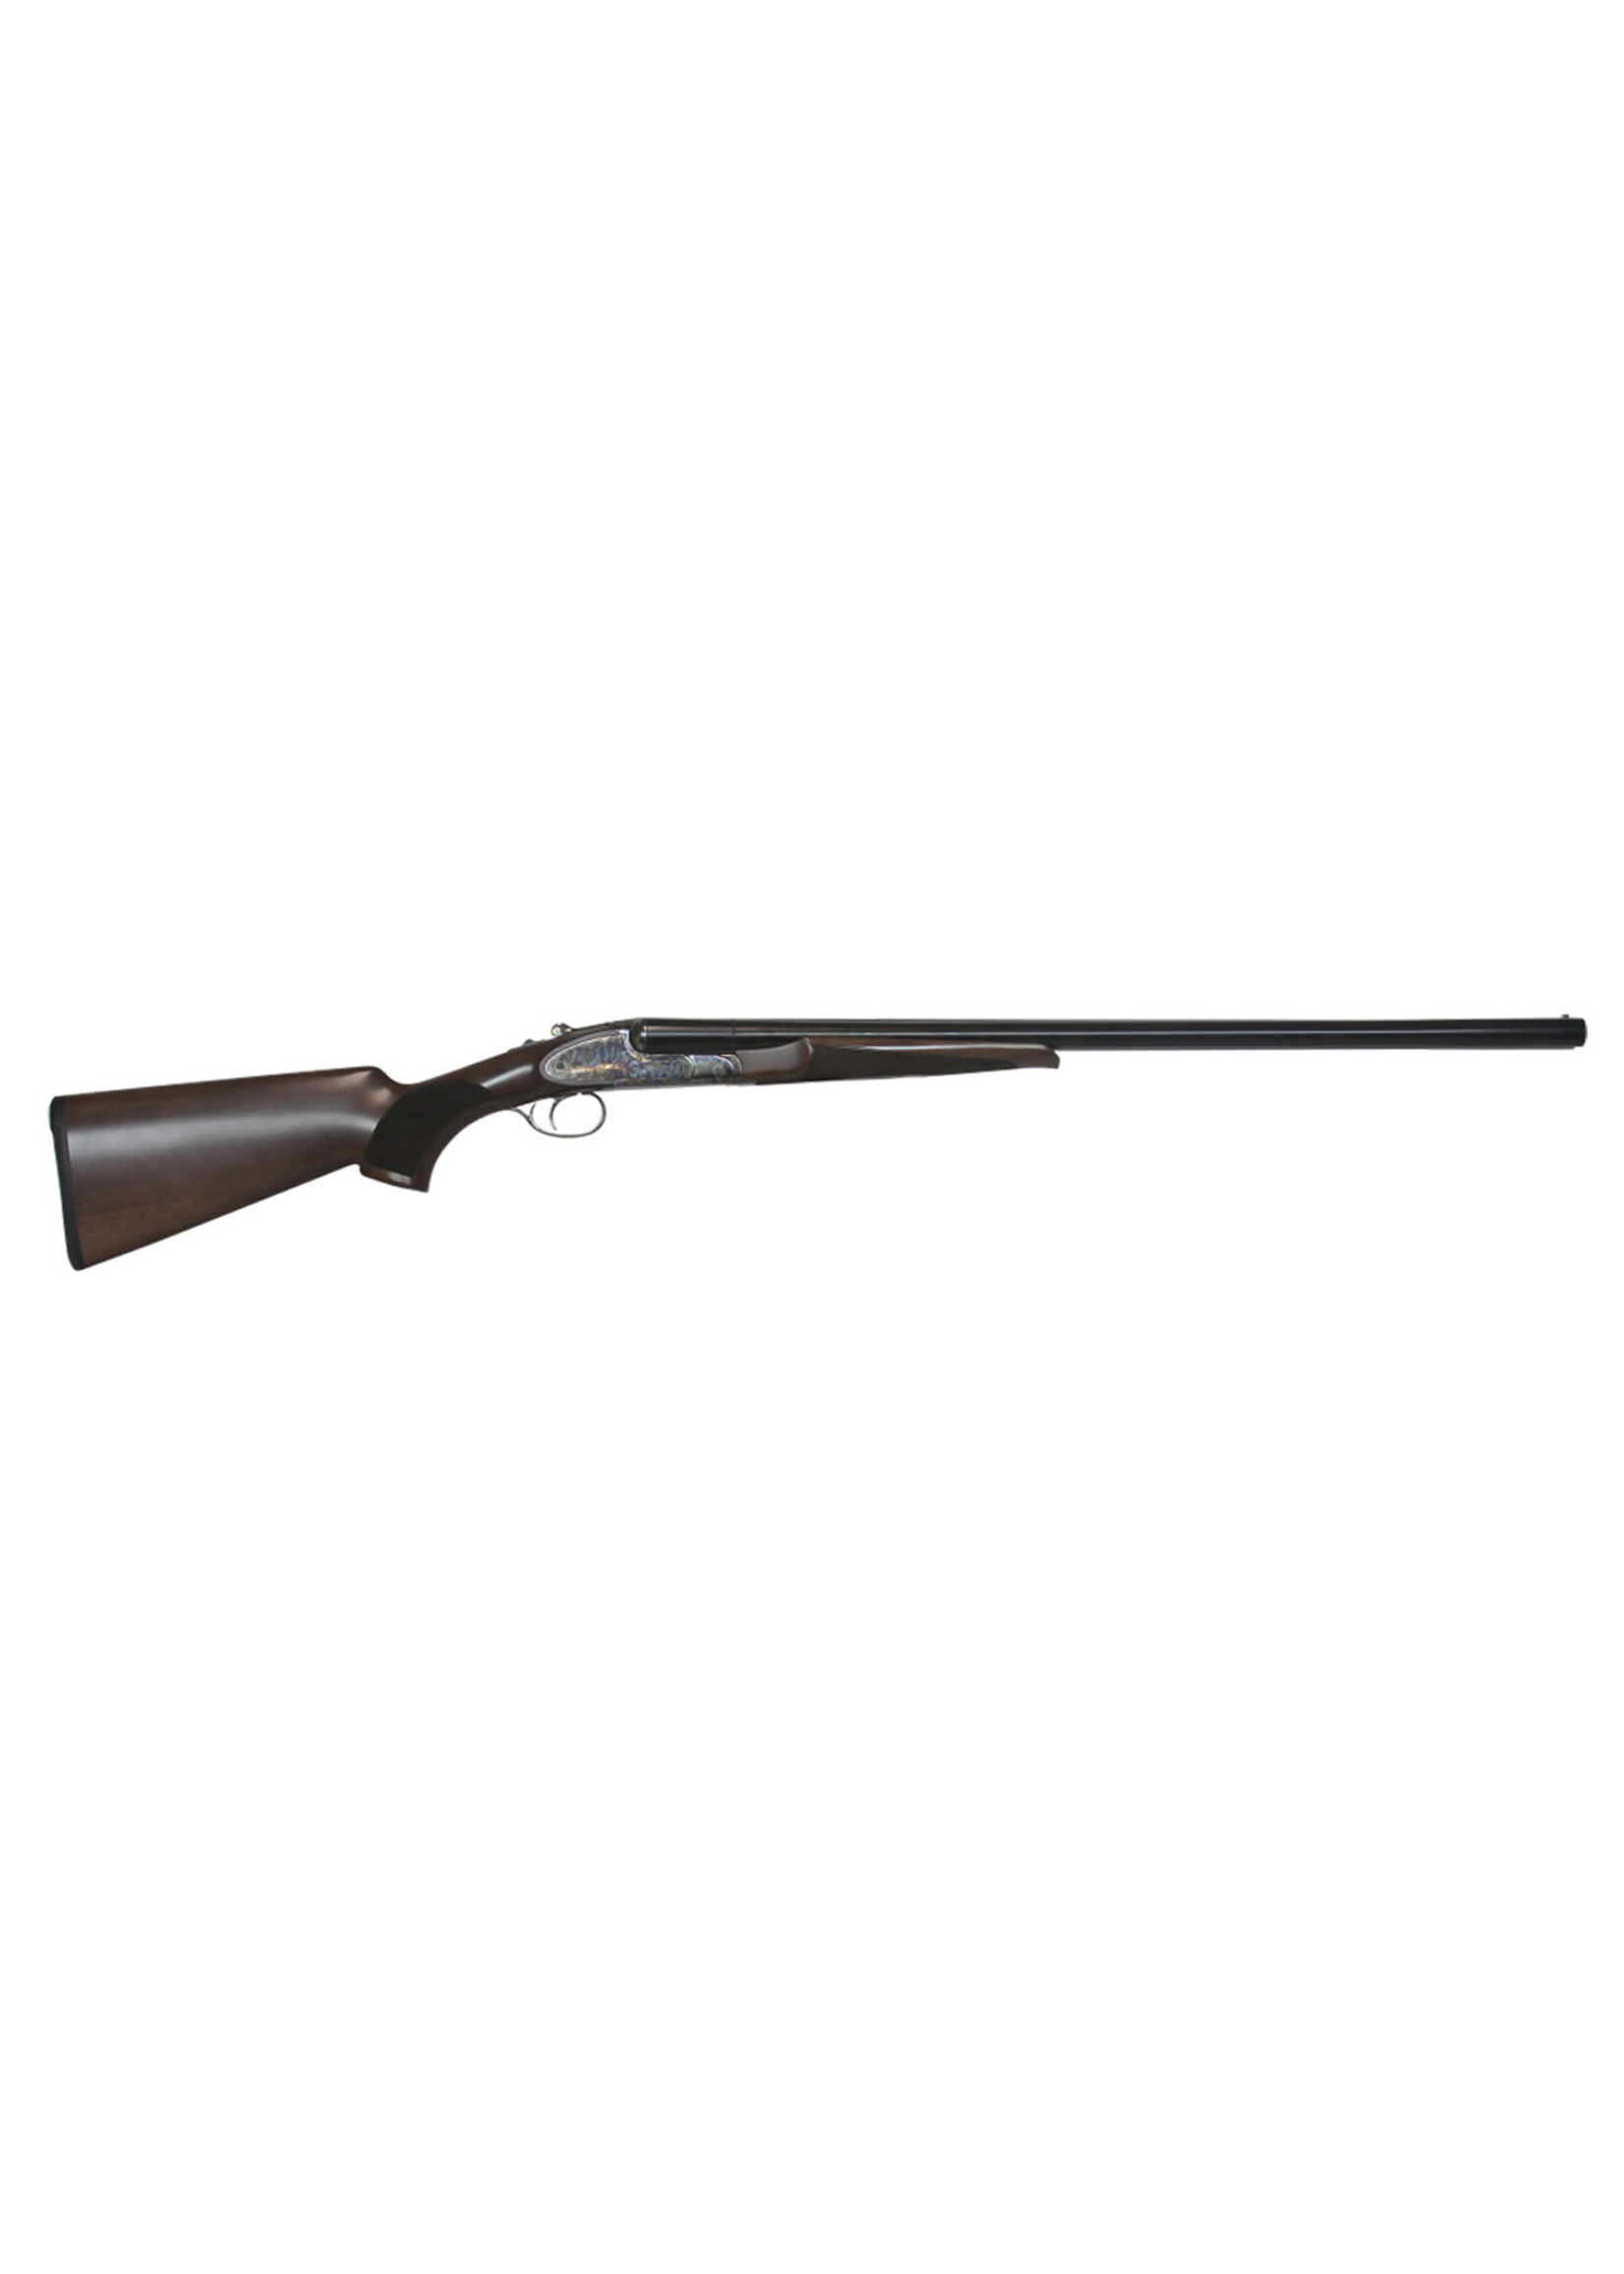 CZ USA CZ-USA 06401 Sharp-Tail 12 Gauge with 28" Black Hard Chrome Side by Side Barrel, 3" Chamber, 2rd Capacity, Color Case Hardened Metal Finish & Turkish Walnut Stock Right Hand (Full Size) Includes 5 Chokes